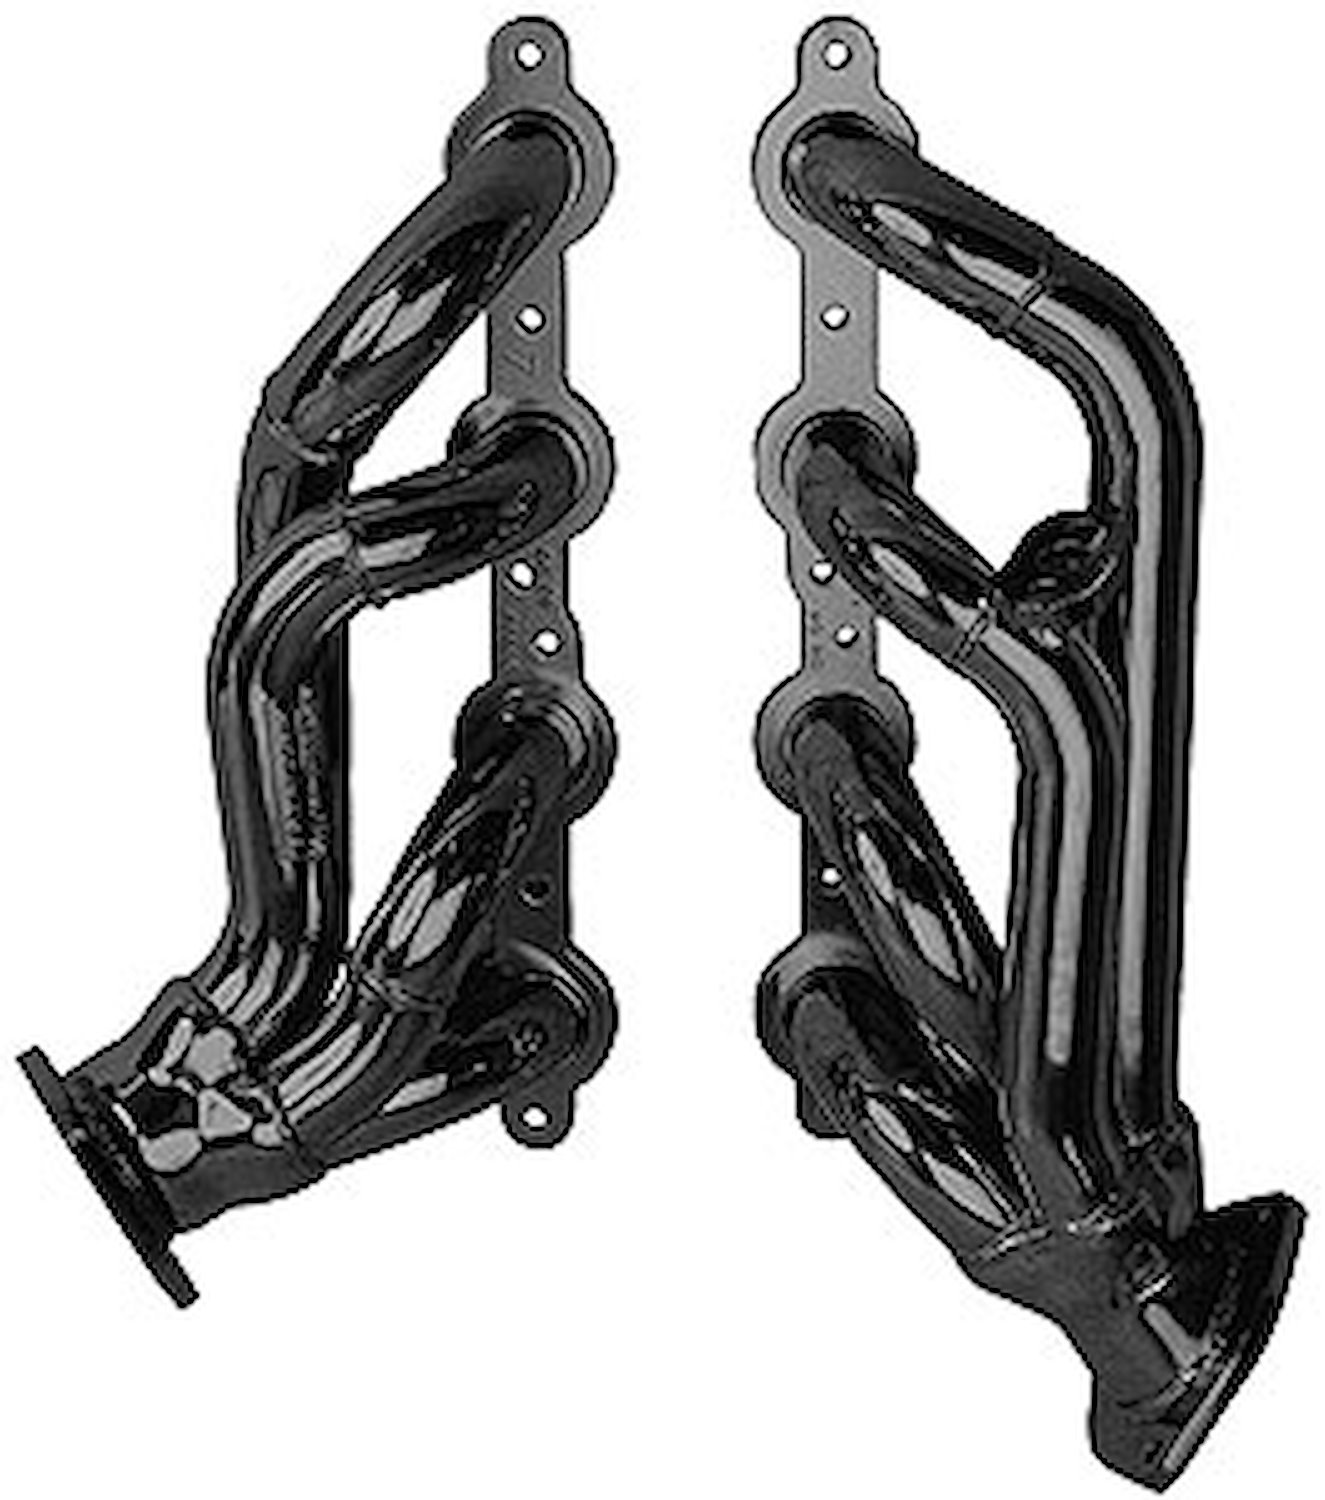 Standard Duty Uncoated Shorty Headers for 1999-2007 Hummer, Chevy/GMC Sierra, Silverado, Avalanche 2WD/4WD Tube Size: 1-5/8"